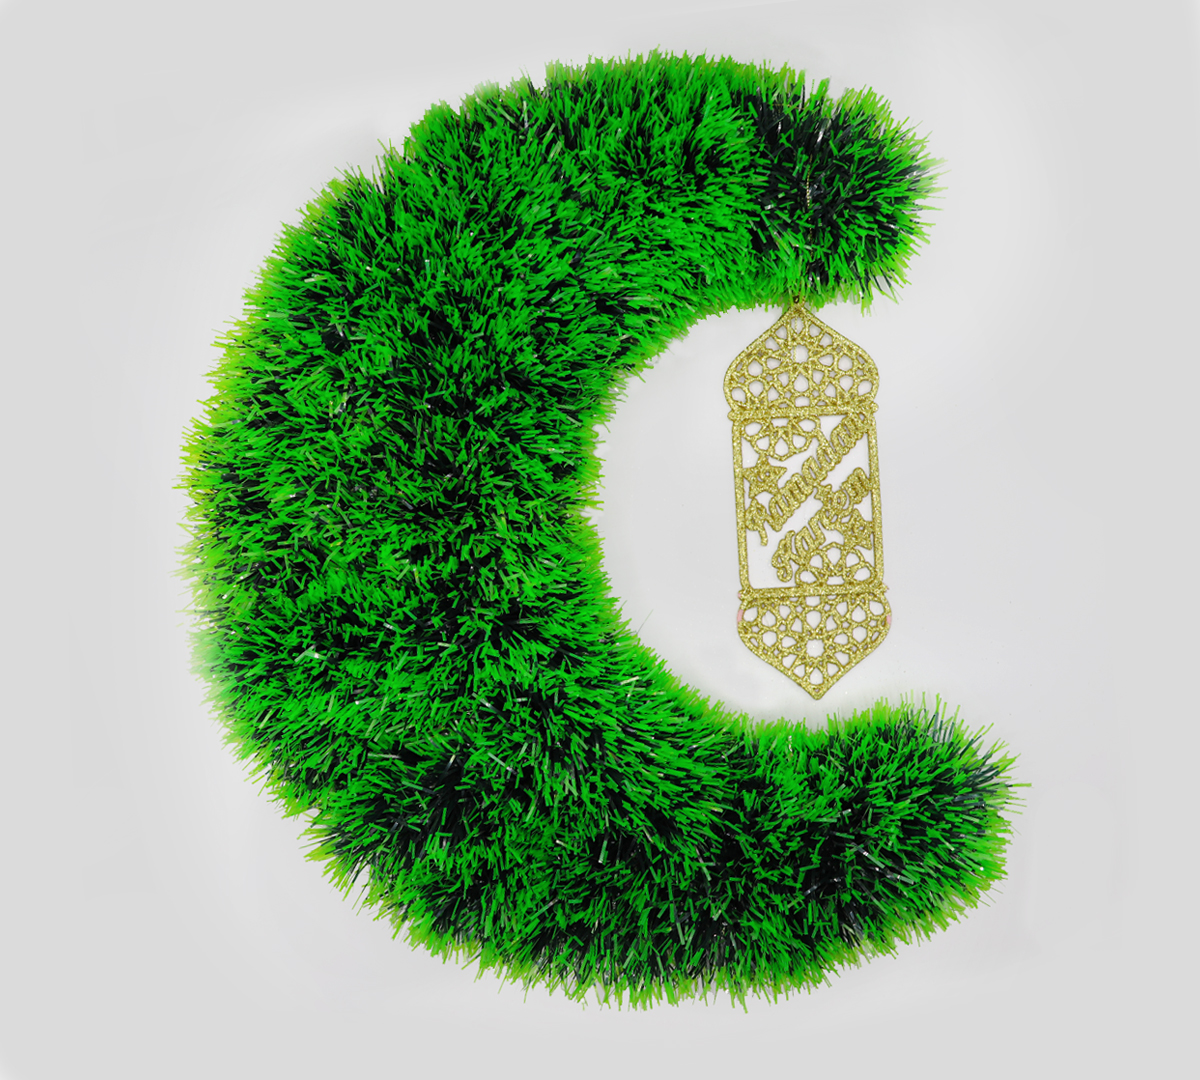 Ramadan Decorations Hanging From Artificial Grass In The Shape Of Ramadan Crescent